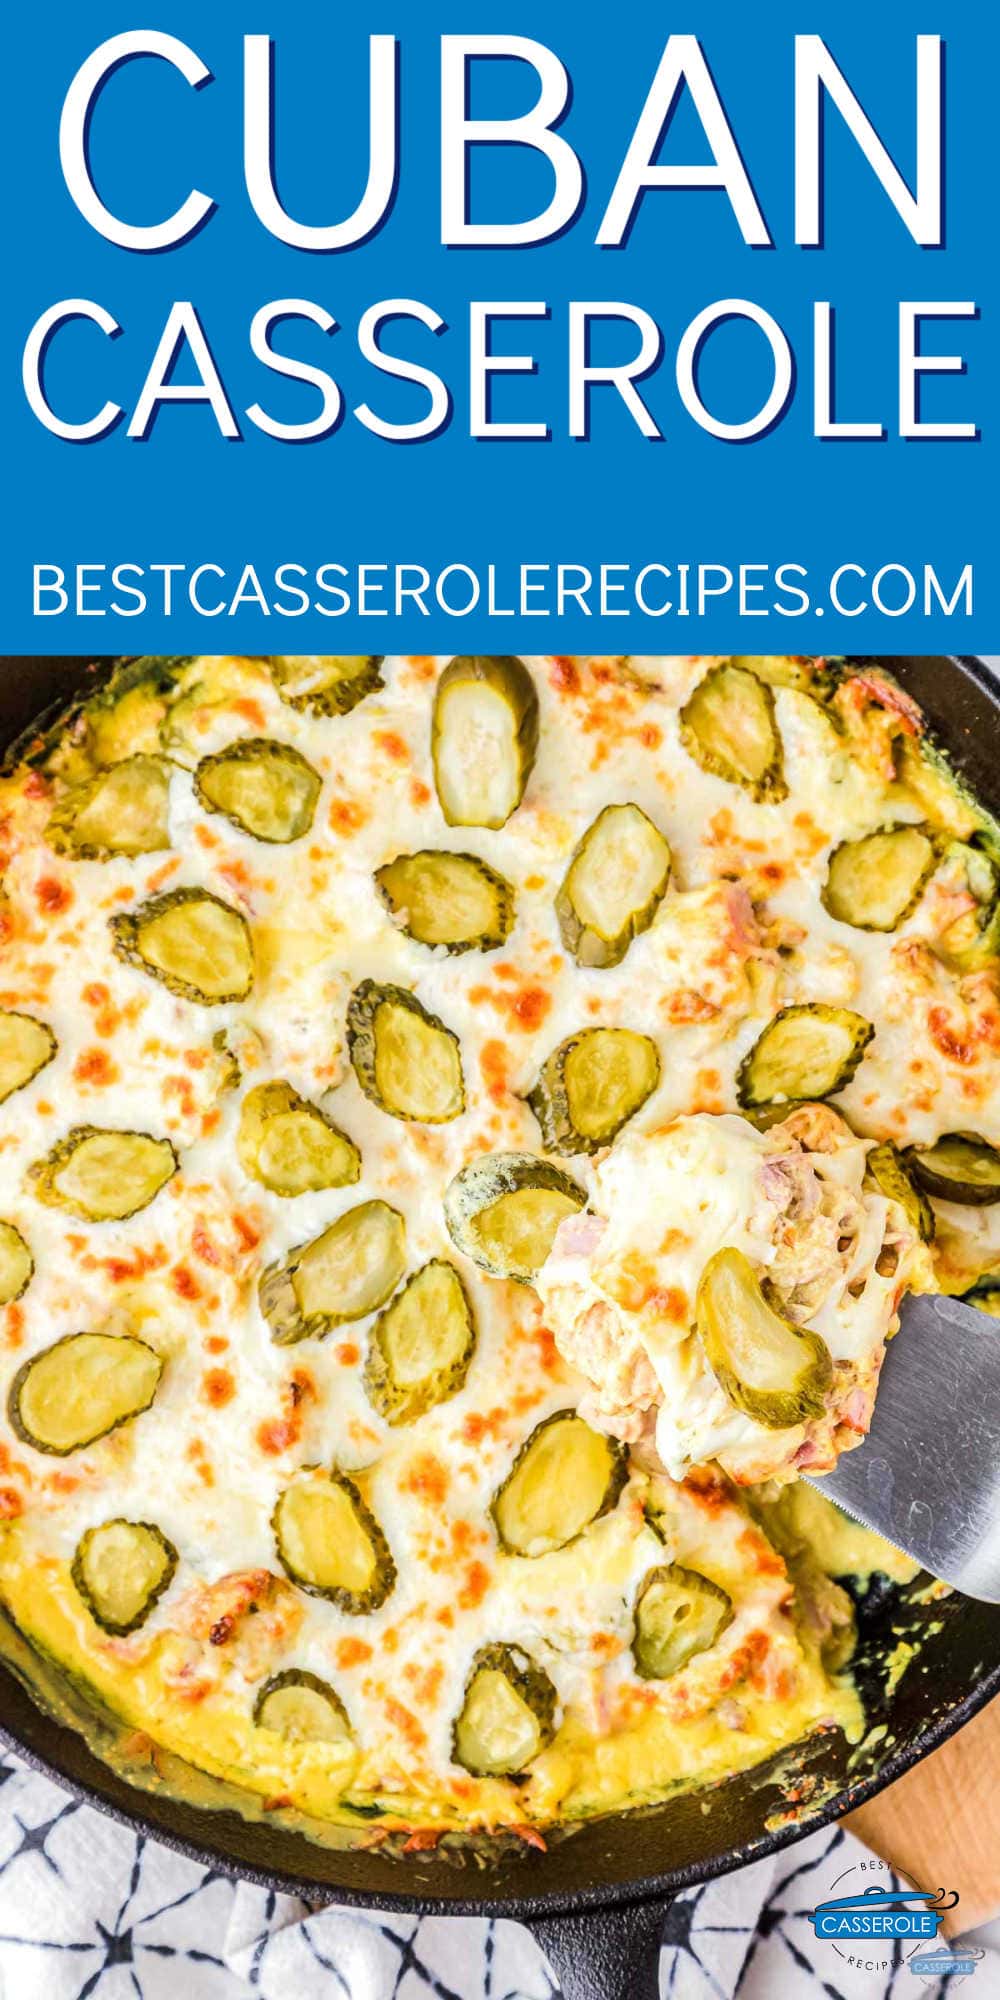 casserole with blue banner and white text